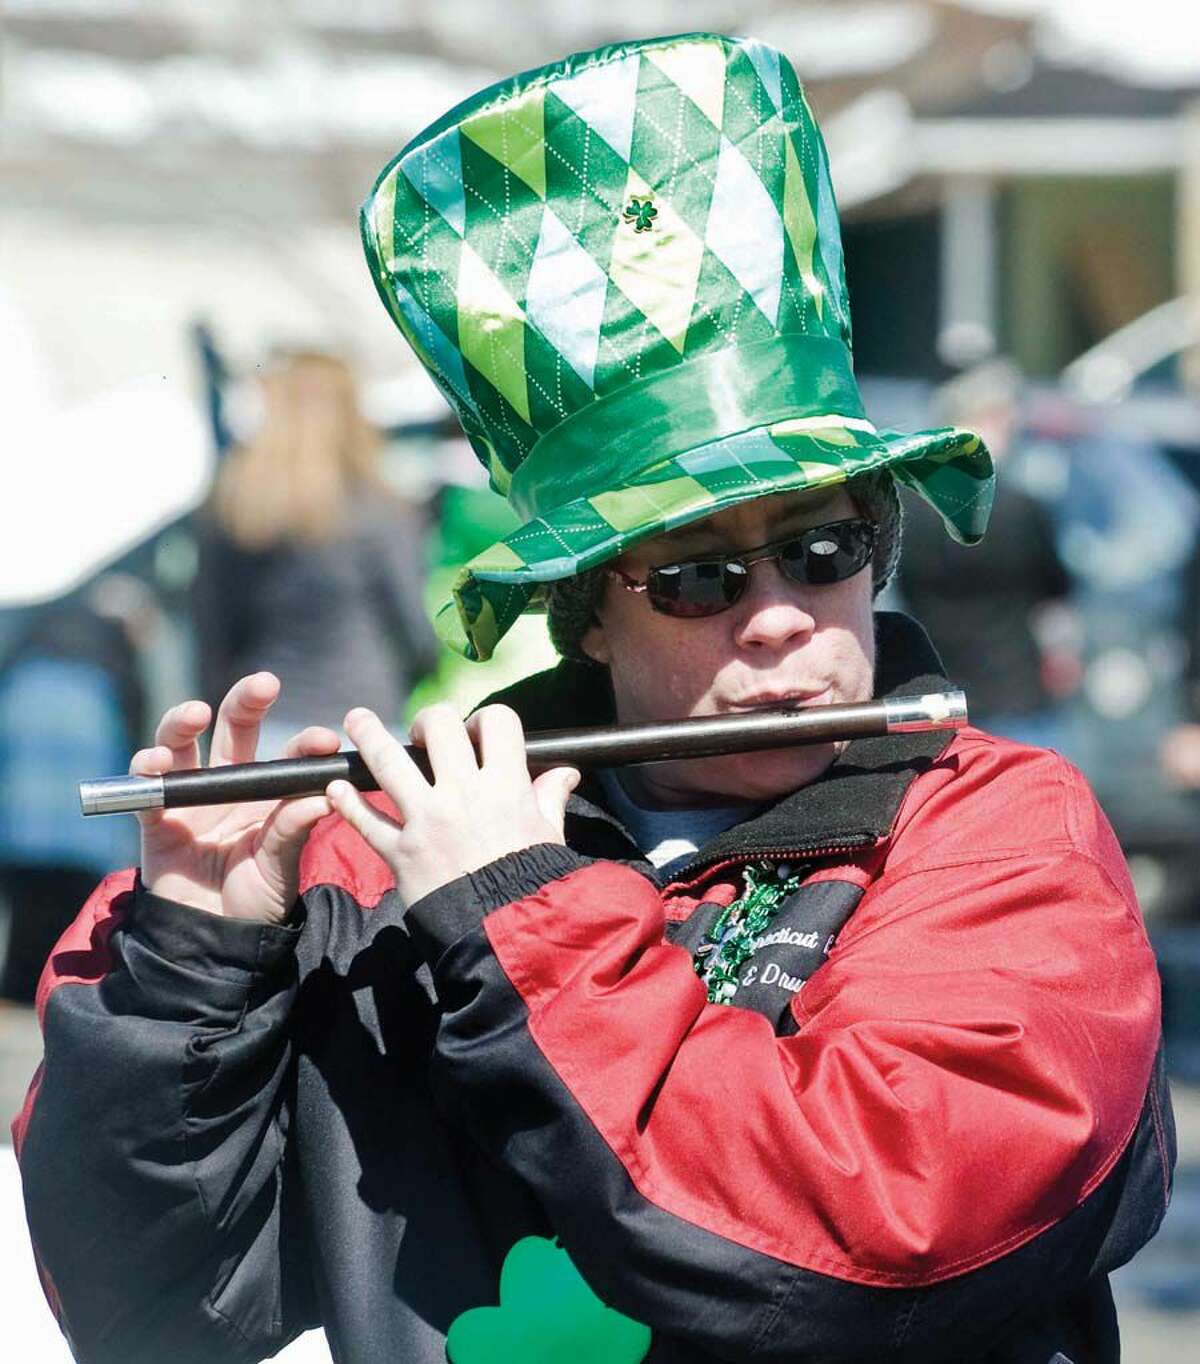 Wendy Weiss, of New Milford, plays the fife for the Connecticut Rebels at the Greater Danbury Irish Cultural Center's St. Patrick's Day parade on Main Street in Danbury. Sunday, March 19, 2017